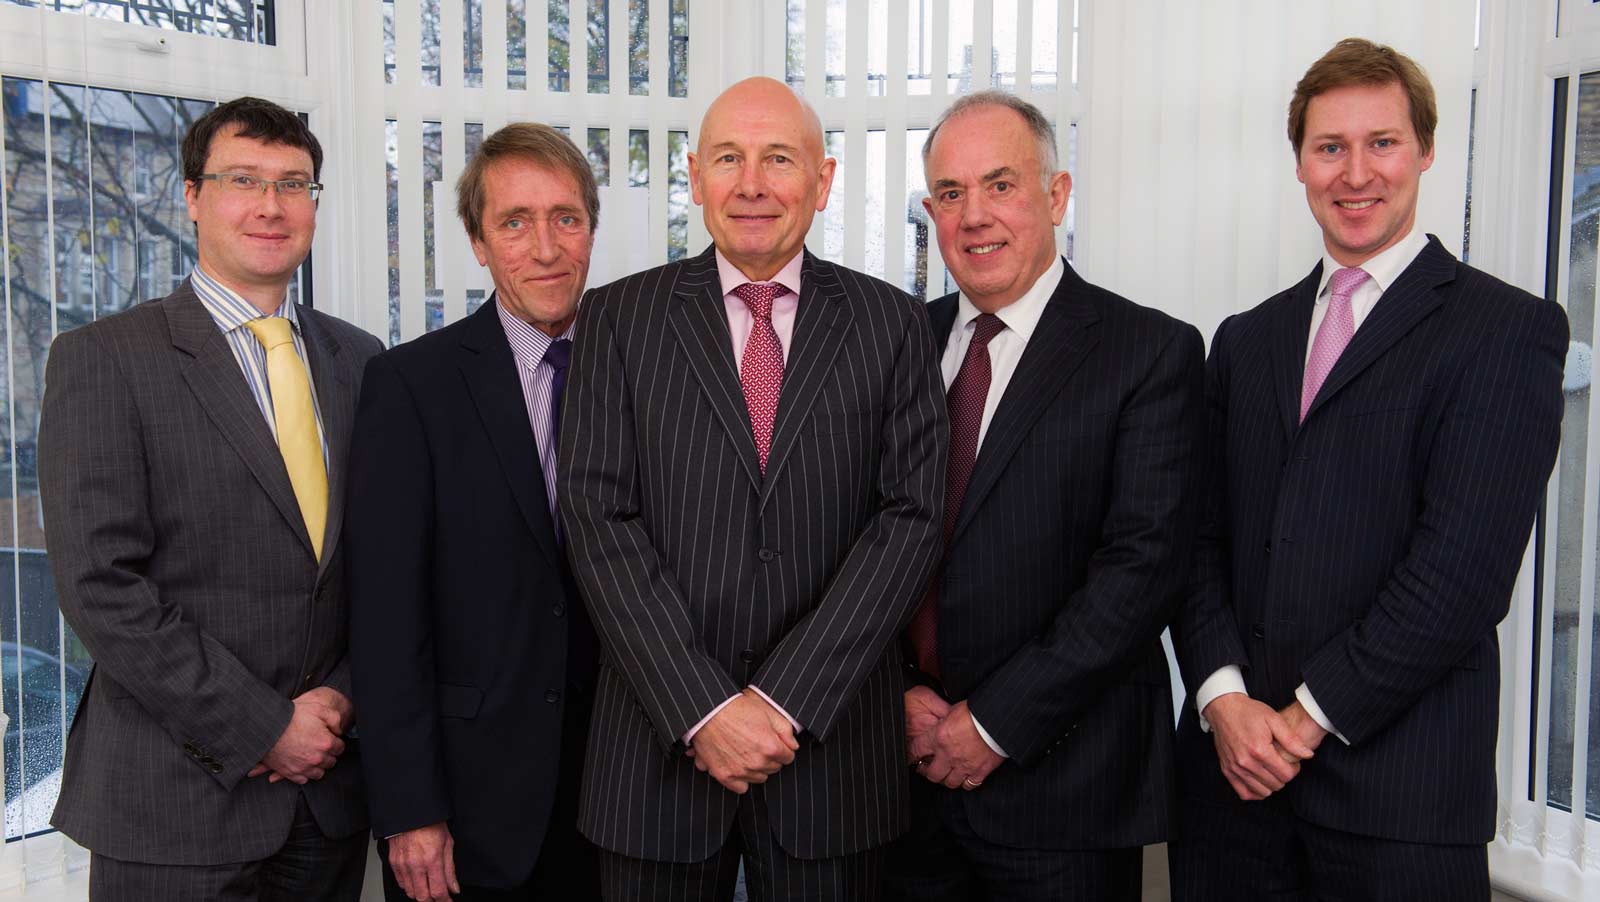 Two Harrogate Accountancy Firms Join Forces in Merger: John Campbell, managing director of DSC (centre) with DSC directors  John Garbutt and Graham French and David Fisher and Alistair Wilkinson, previously of Fisher Wilkinson